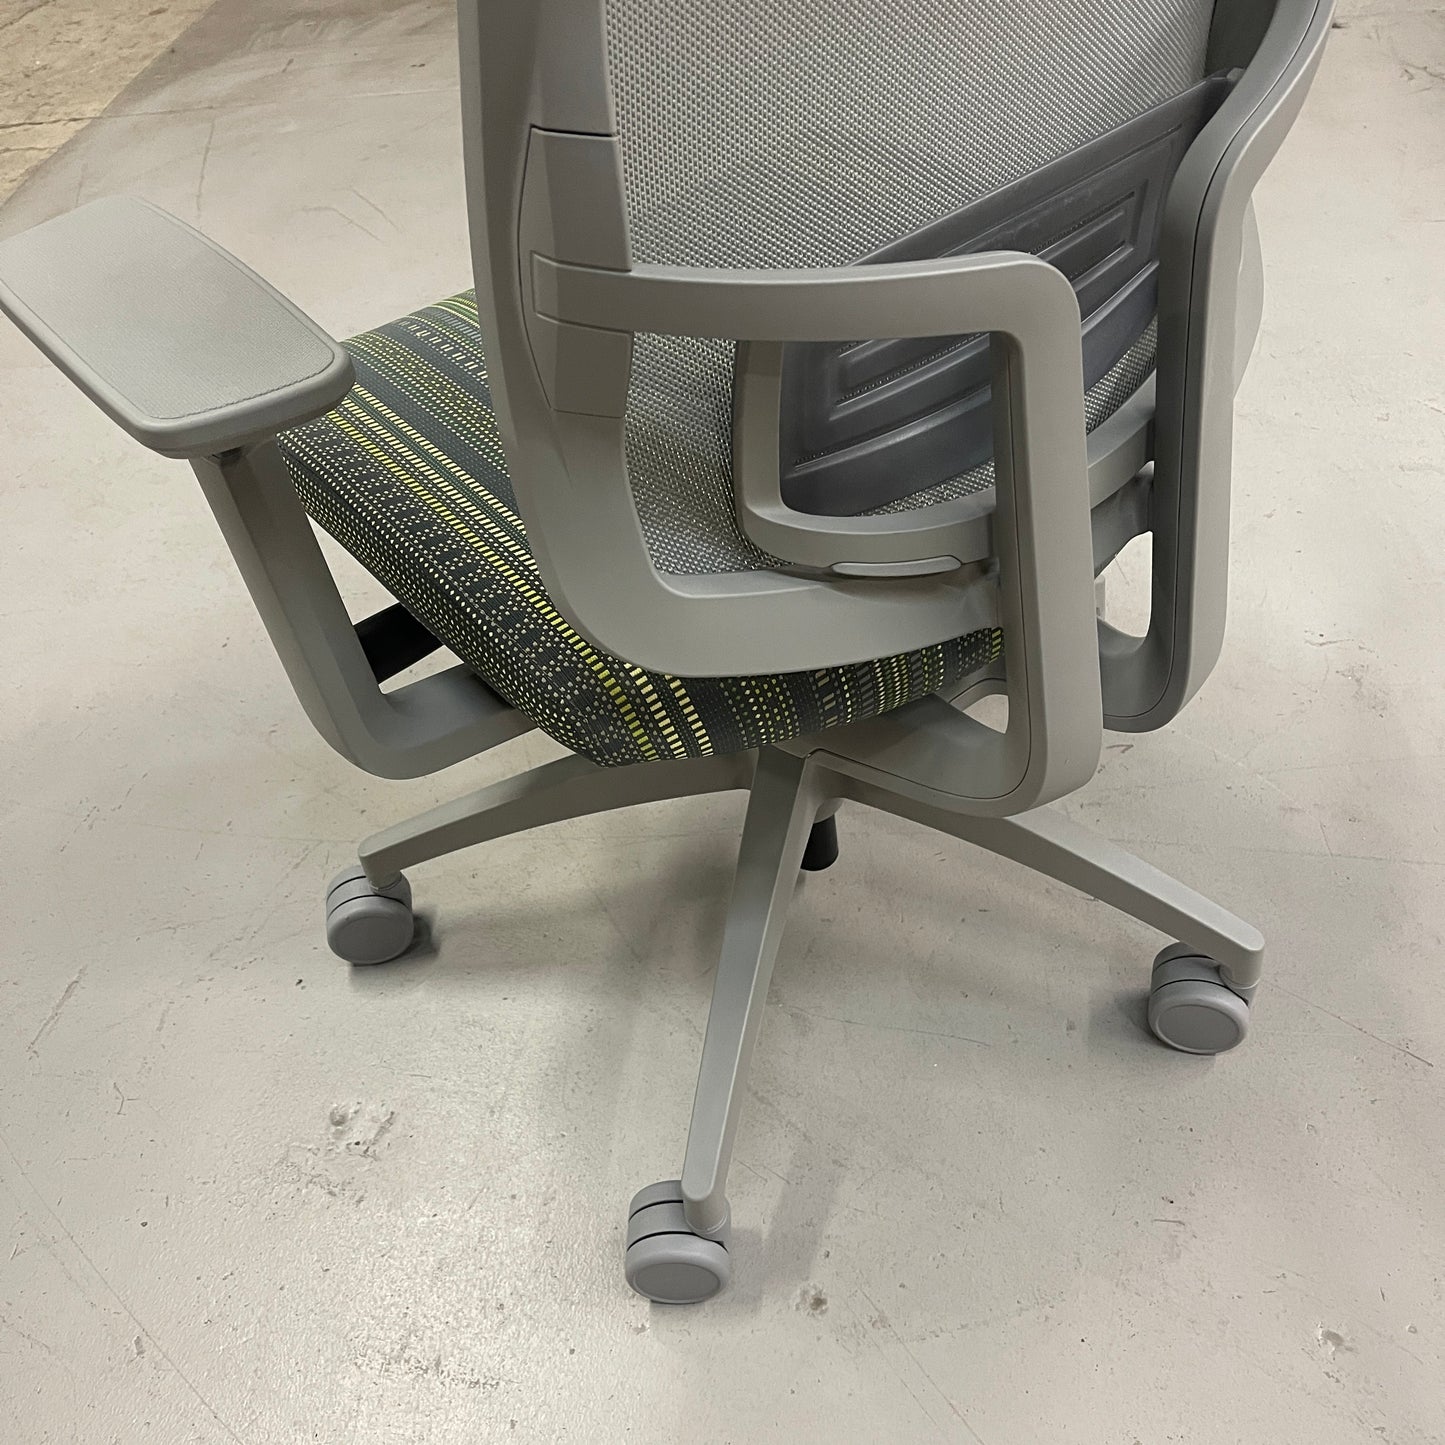 SITONIT Seating Rolling High Back Height Adjustable Office Chair Focus 2.0 Greenlight Pattern (New)